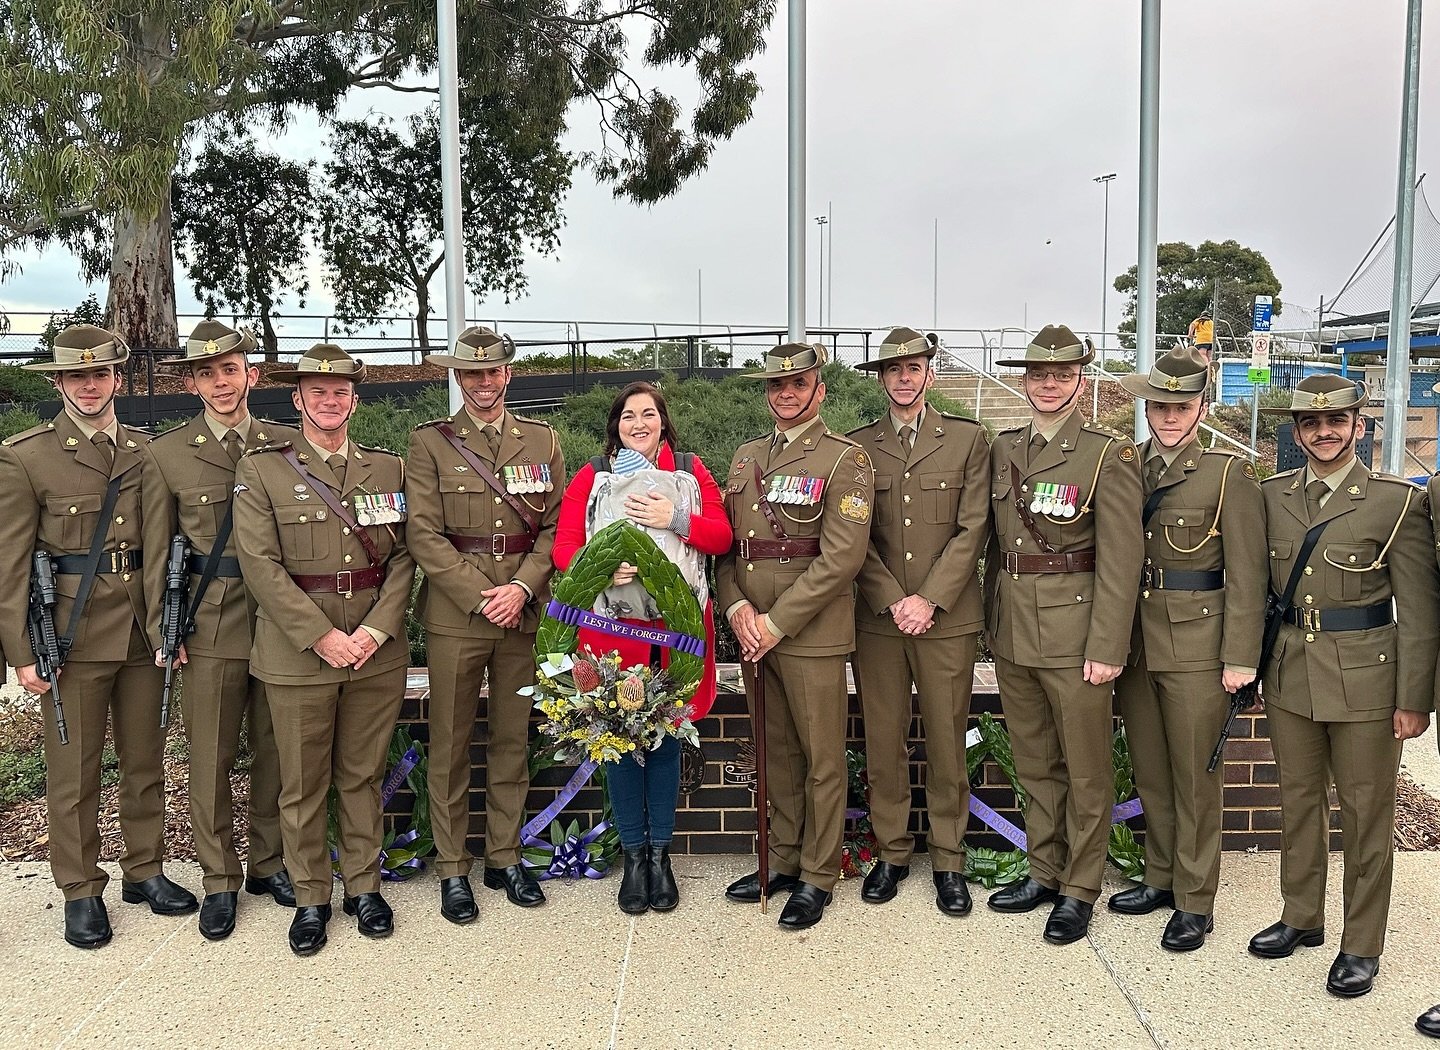 LEST WE FORGET 🌺 About 500 locals paid tribute to our servicemen and women at Edwardstown this Anzac Day.

I was privileged to read a verse to mark their sacrifice and pray for light amid the darkness.

Thanks to Lt Col Scott Calvert for again organ